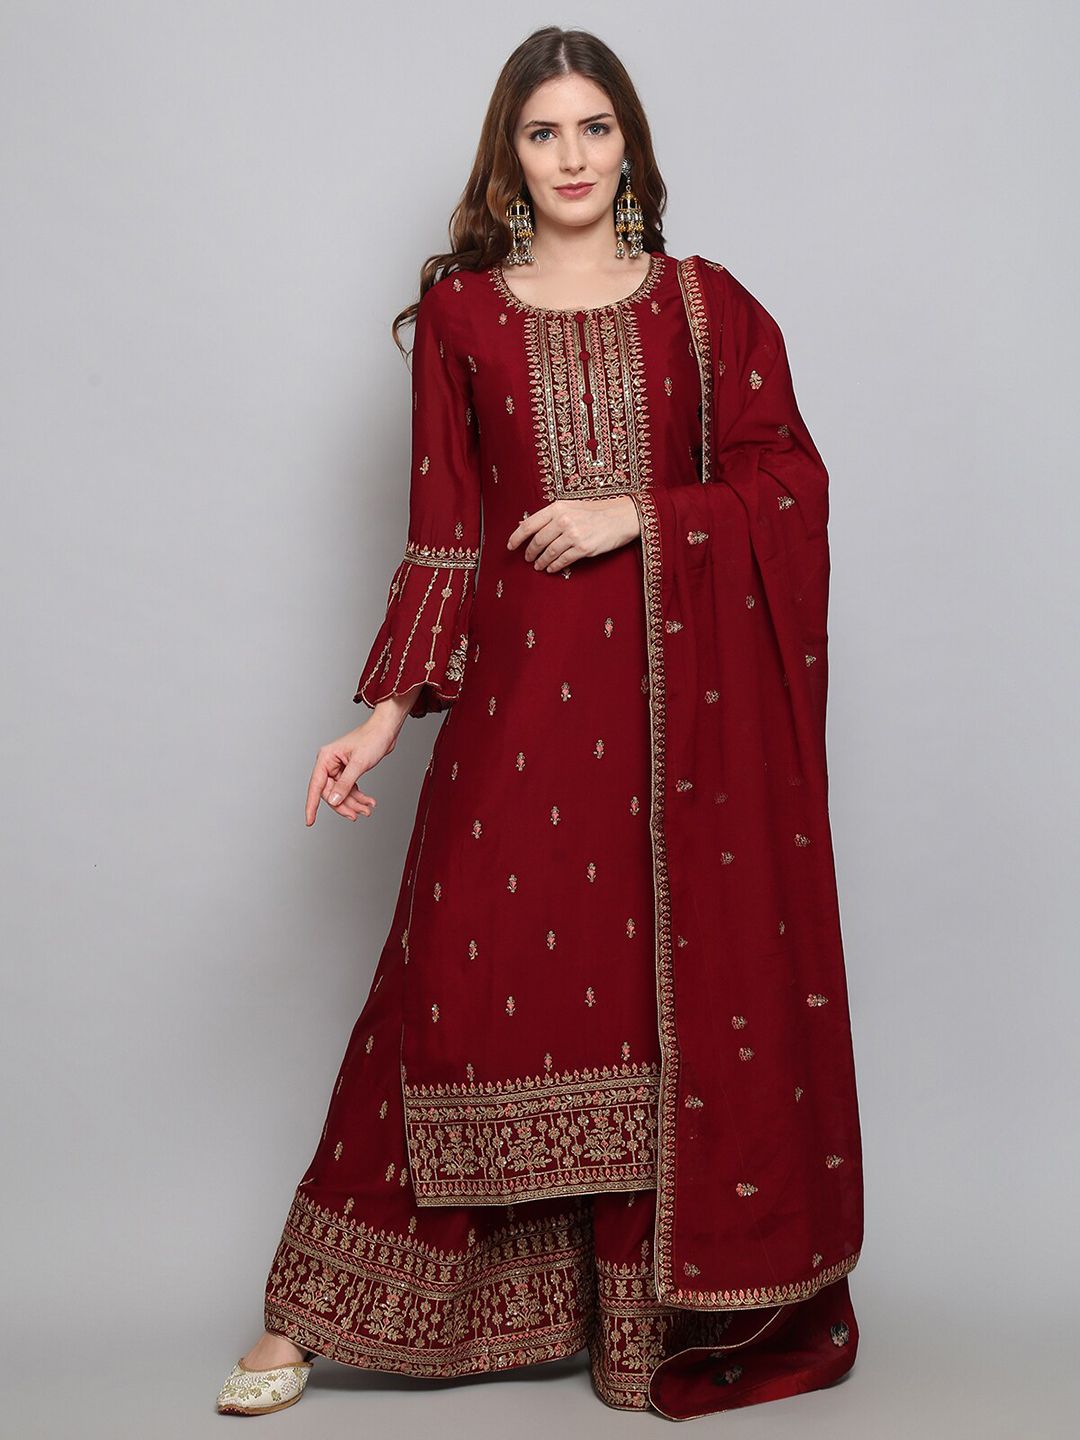 Stylee LIFESTYLE Maroon & Gold-Toned Embroidered Semi-Stitched Dress Material Price in India